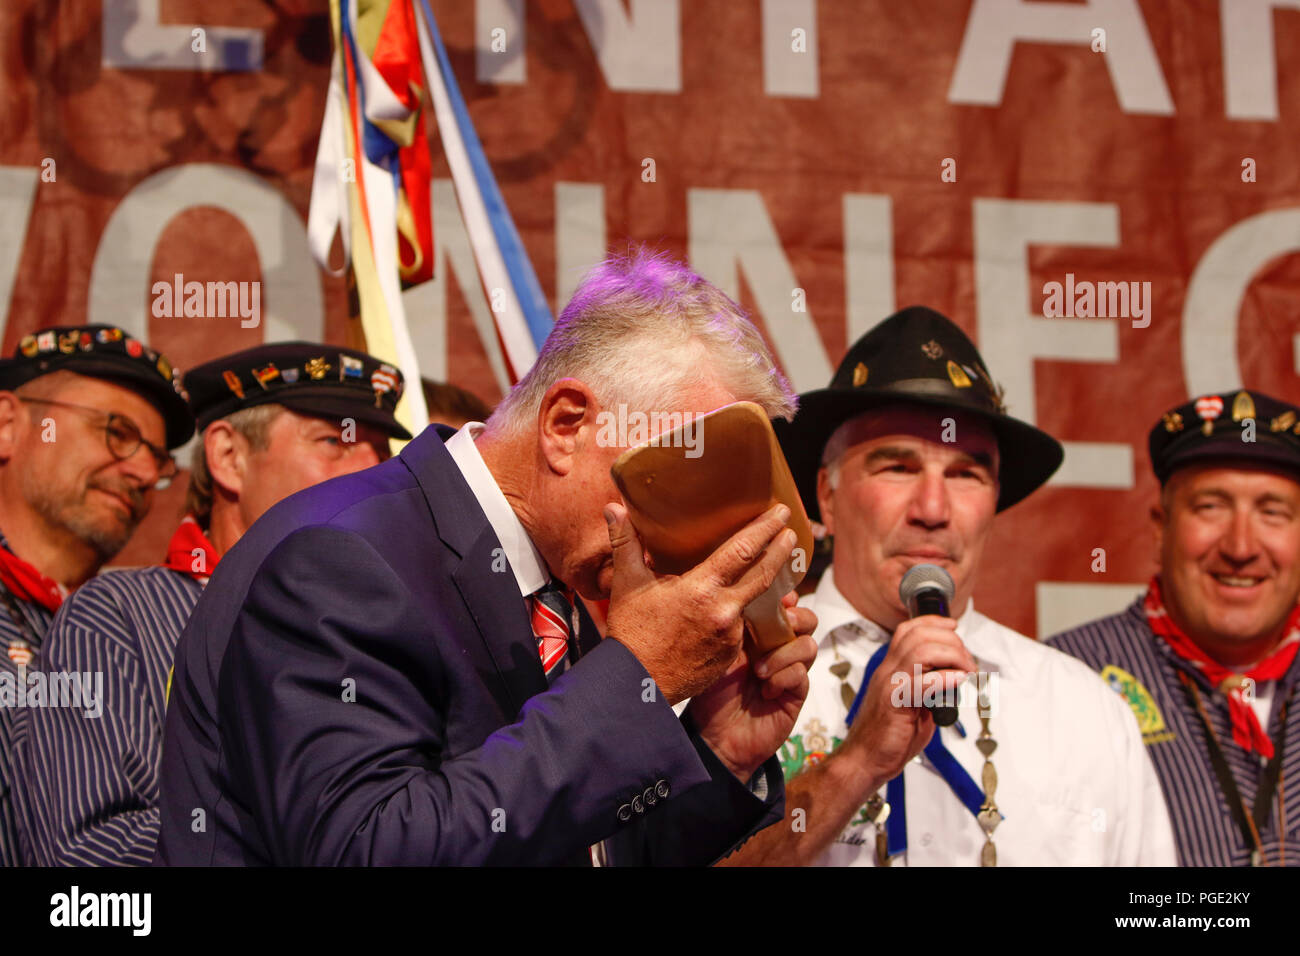 Worms, Germany. 25th Aug, 2018. The Lord Mayor of Worms, Michael Kissel, drinks wine from the traditional Handnirsch (wooden ladle) at the opening ceremony. The largest wine and funfair along the Rhine, the Backfischfest started in Worms with the traditional handing over of power from the Lord Mayor to the mayor of the fishermen's lea. The ceremony was framed by dances and music. Credit: Michael Debets/Pacific Press/Alamy Live News Stock Photo